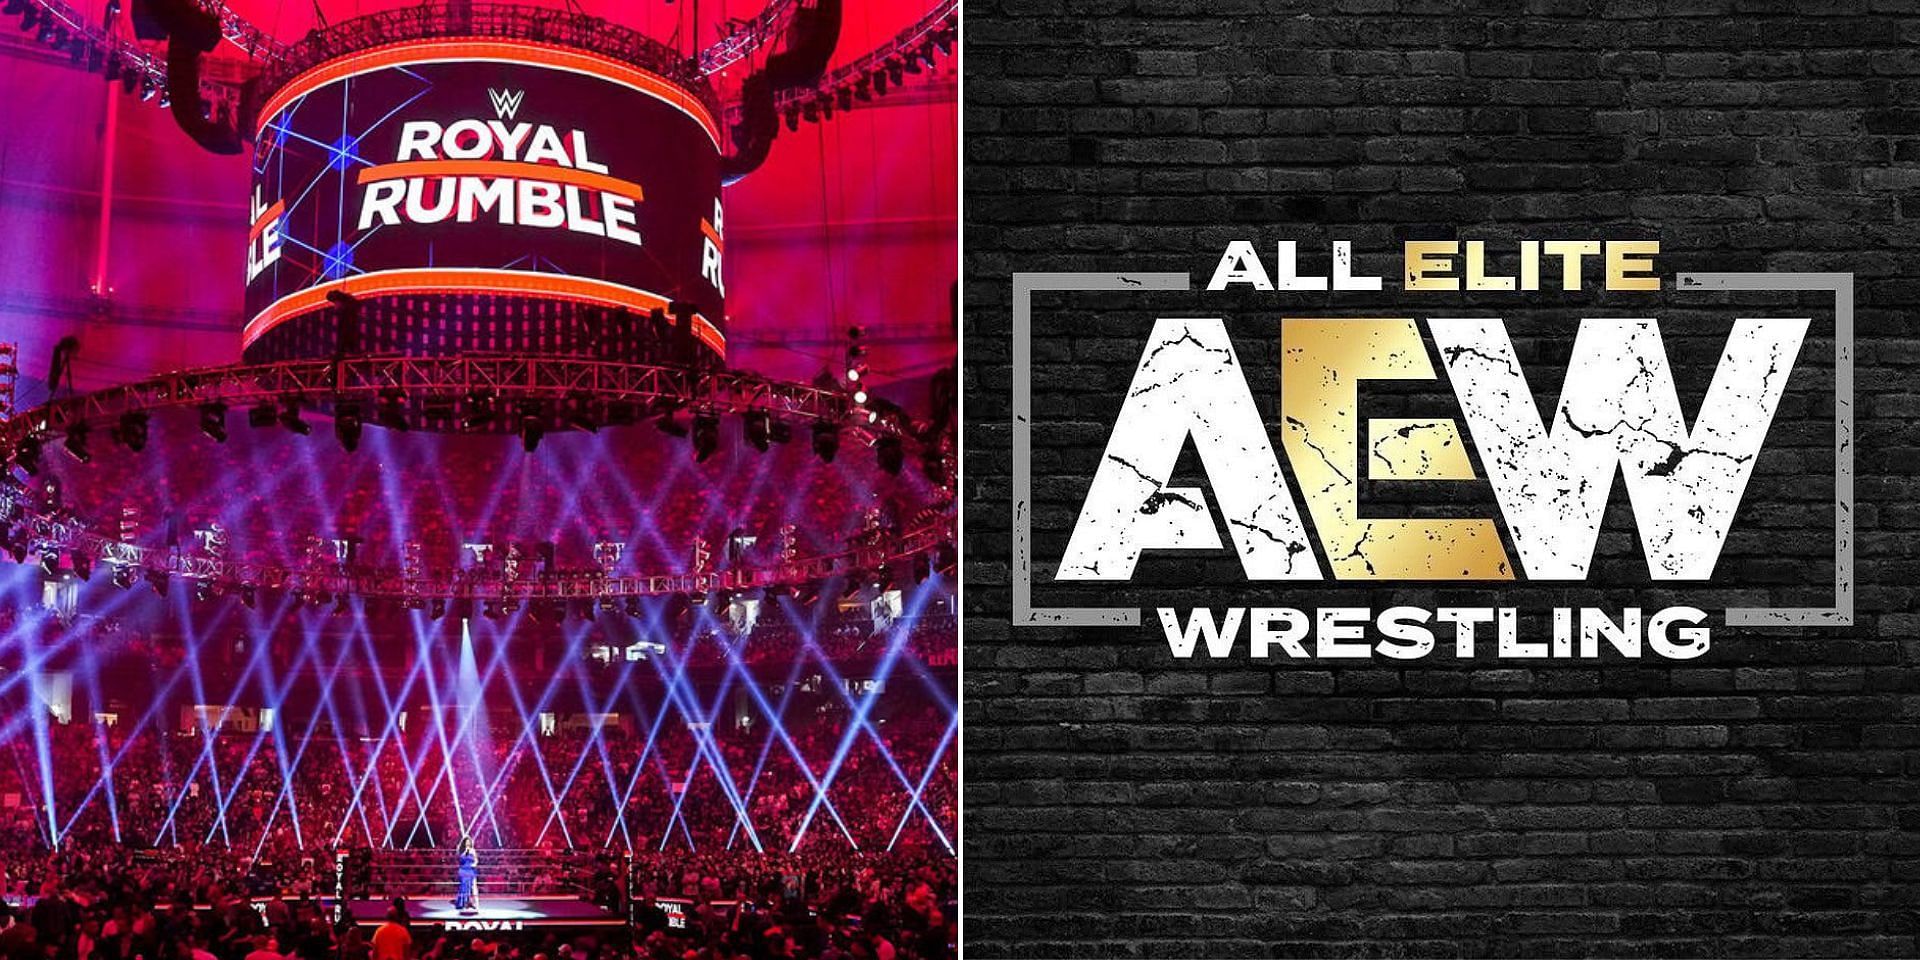 A former AEW star wanted tor return at Royal Rumble